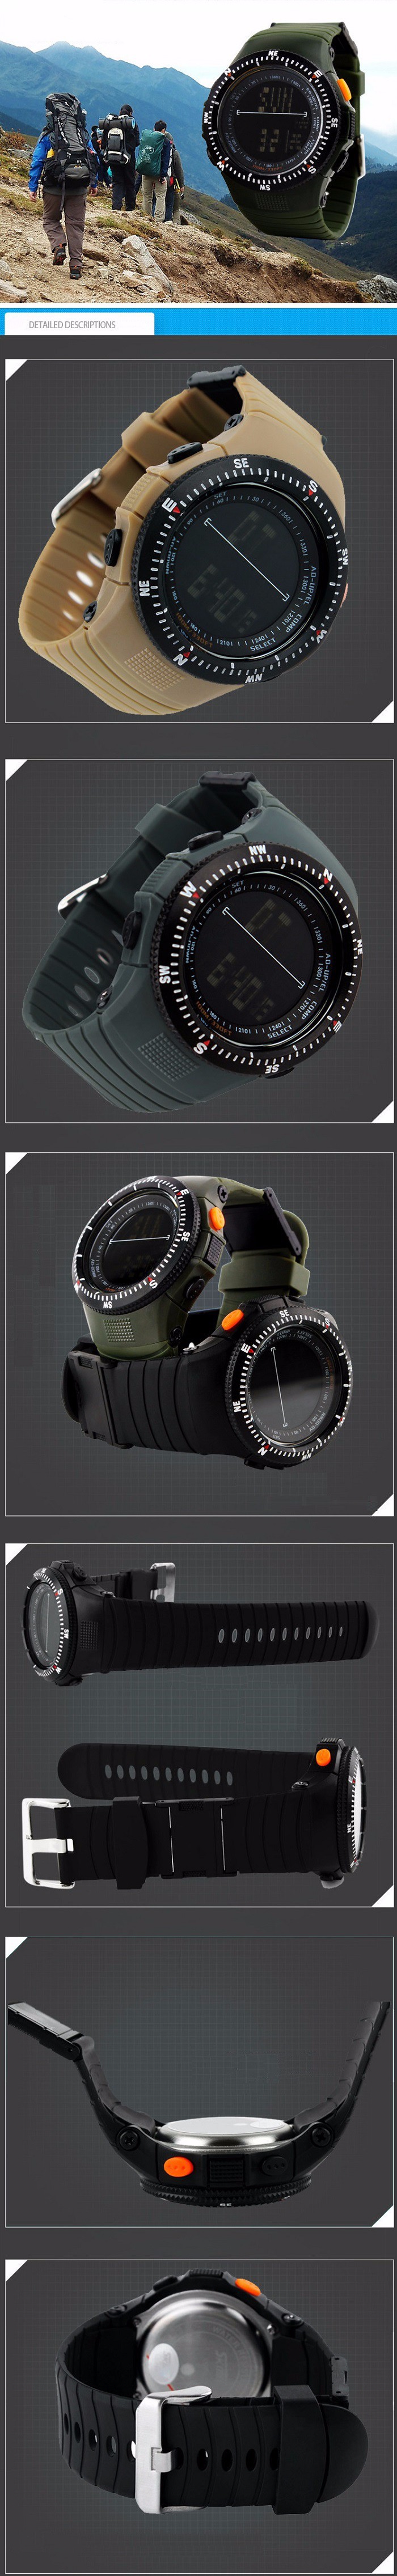 2014 Hot Sales Outdoor Digital Men Sports Watches Skmei Military Watches Army Watch Waterproof 50m Auto Date Alarm Stop Watch (2)